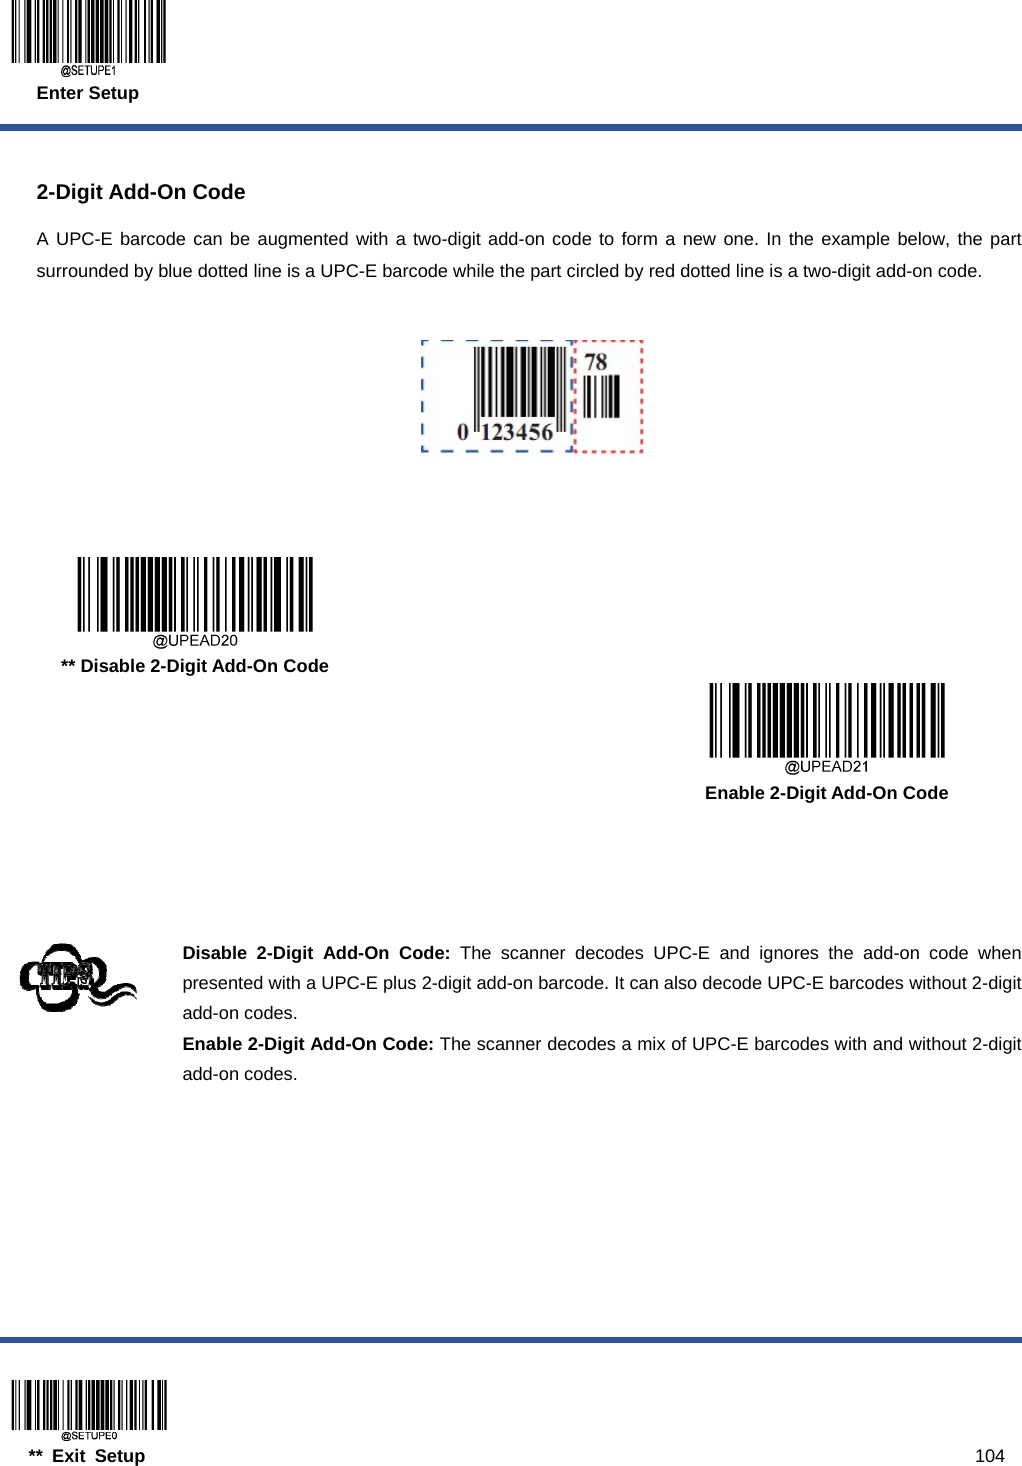  Enter Setup  ** Exit Setup                                                                                           104  2-Digit Add-On Code A UPC-E barcode can be augmented with a two-digit add-on code to form a new one. In the example below, the part surrounded by blue dotted line is a UPC-E barcode while the part circled by red dotted line is a two-digit add-on code.         ** Disable 2-Digit Add-On Code      Enable 2-Digit Add-On Code     Disable 2-Digit Add-On Code: The scanner decodes UPC-E and ignores the add-on code when presented with a UPC-E plus 2-digit add-on barcode. It can also decode UPC-E barcodes without 2-digit add-on codes. Enable 2-Digit Add-On Code: The scanner decodes a mix of UPC-E barcodes with and without 2-digit add-on codes.  